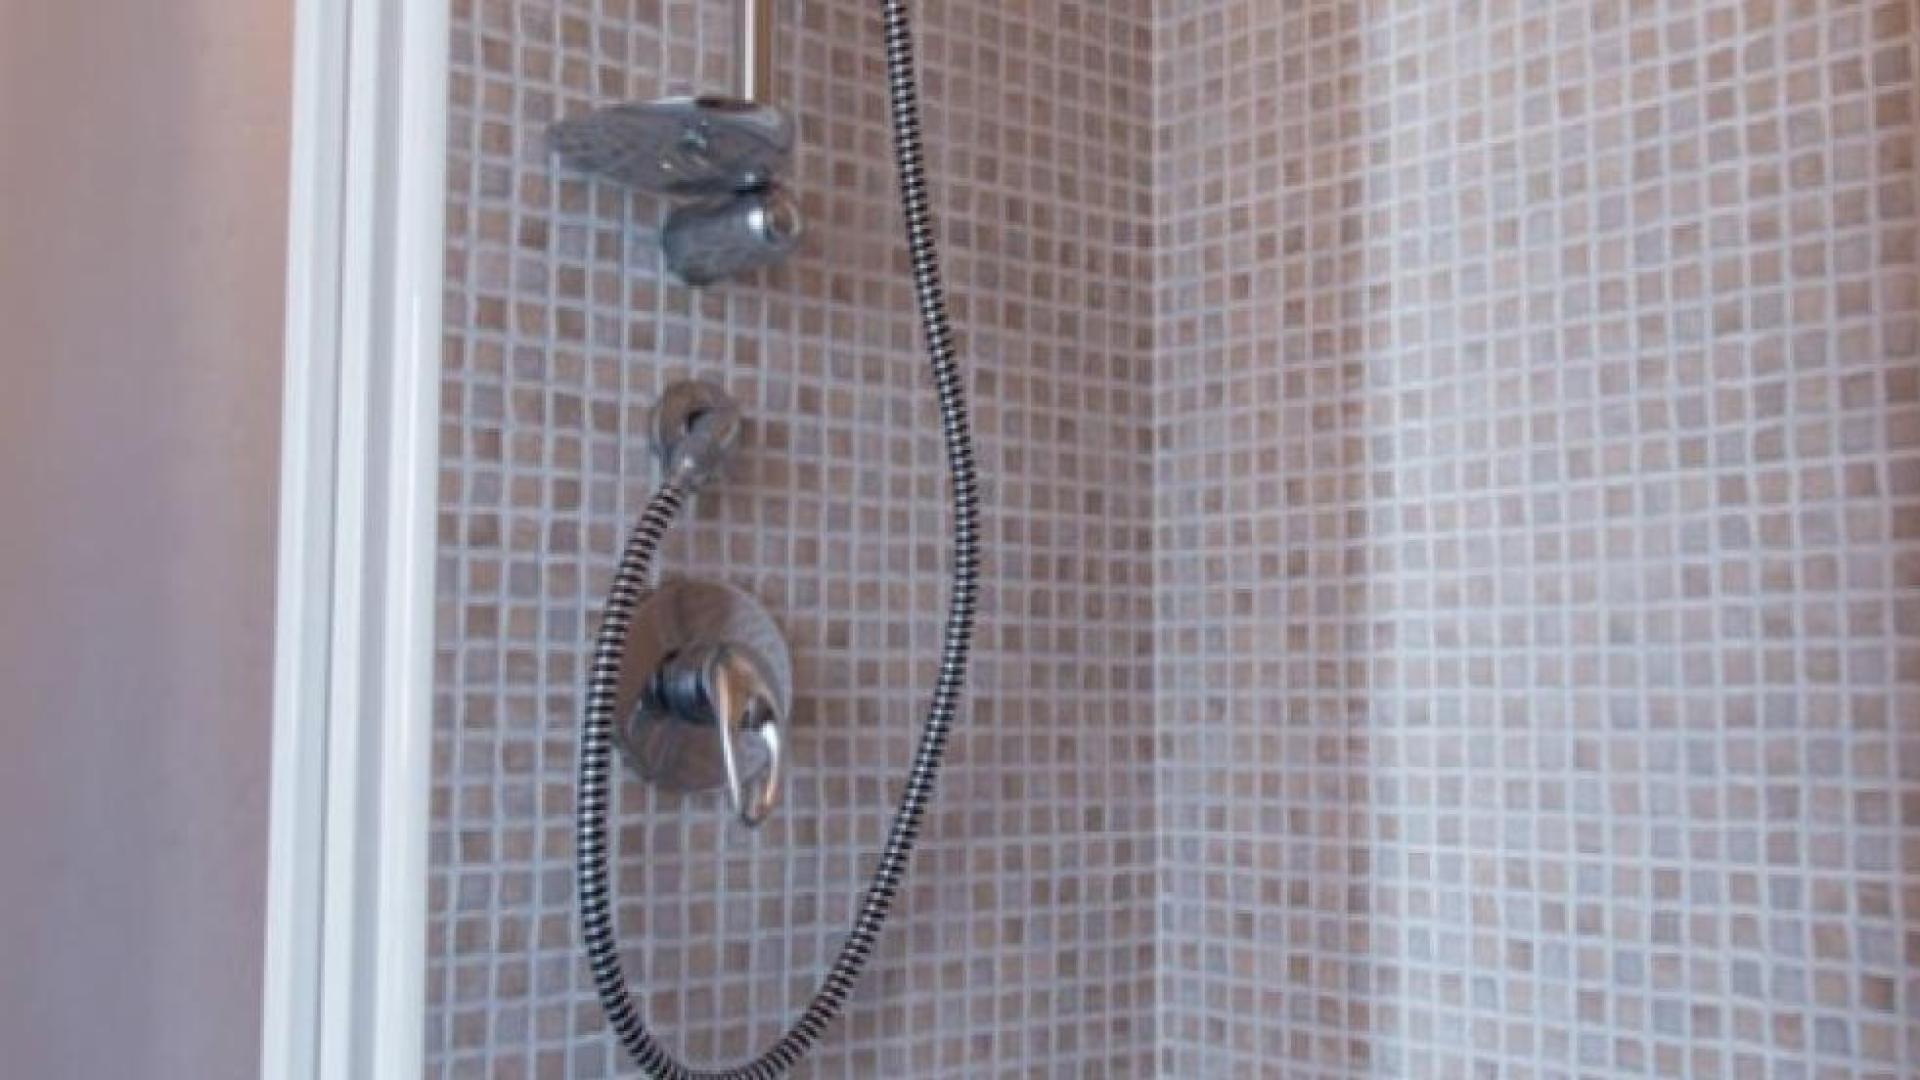 Shower with mosaic tiles and metal fixtures.